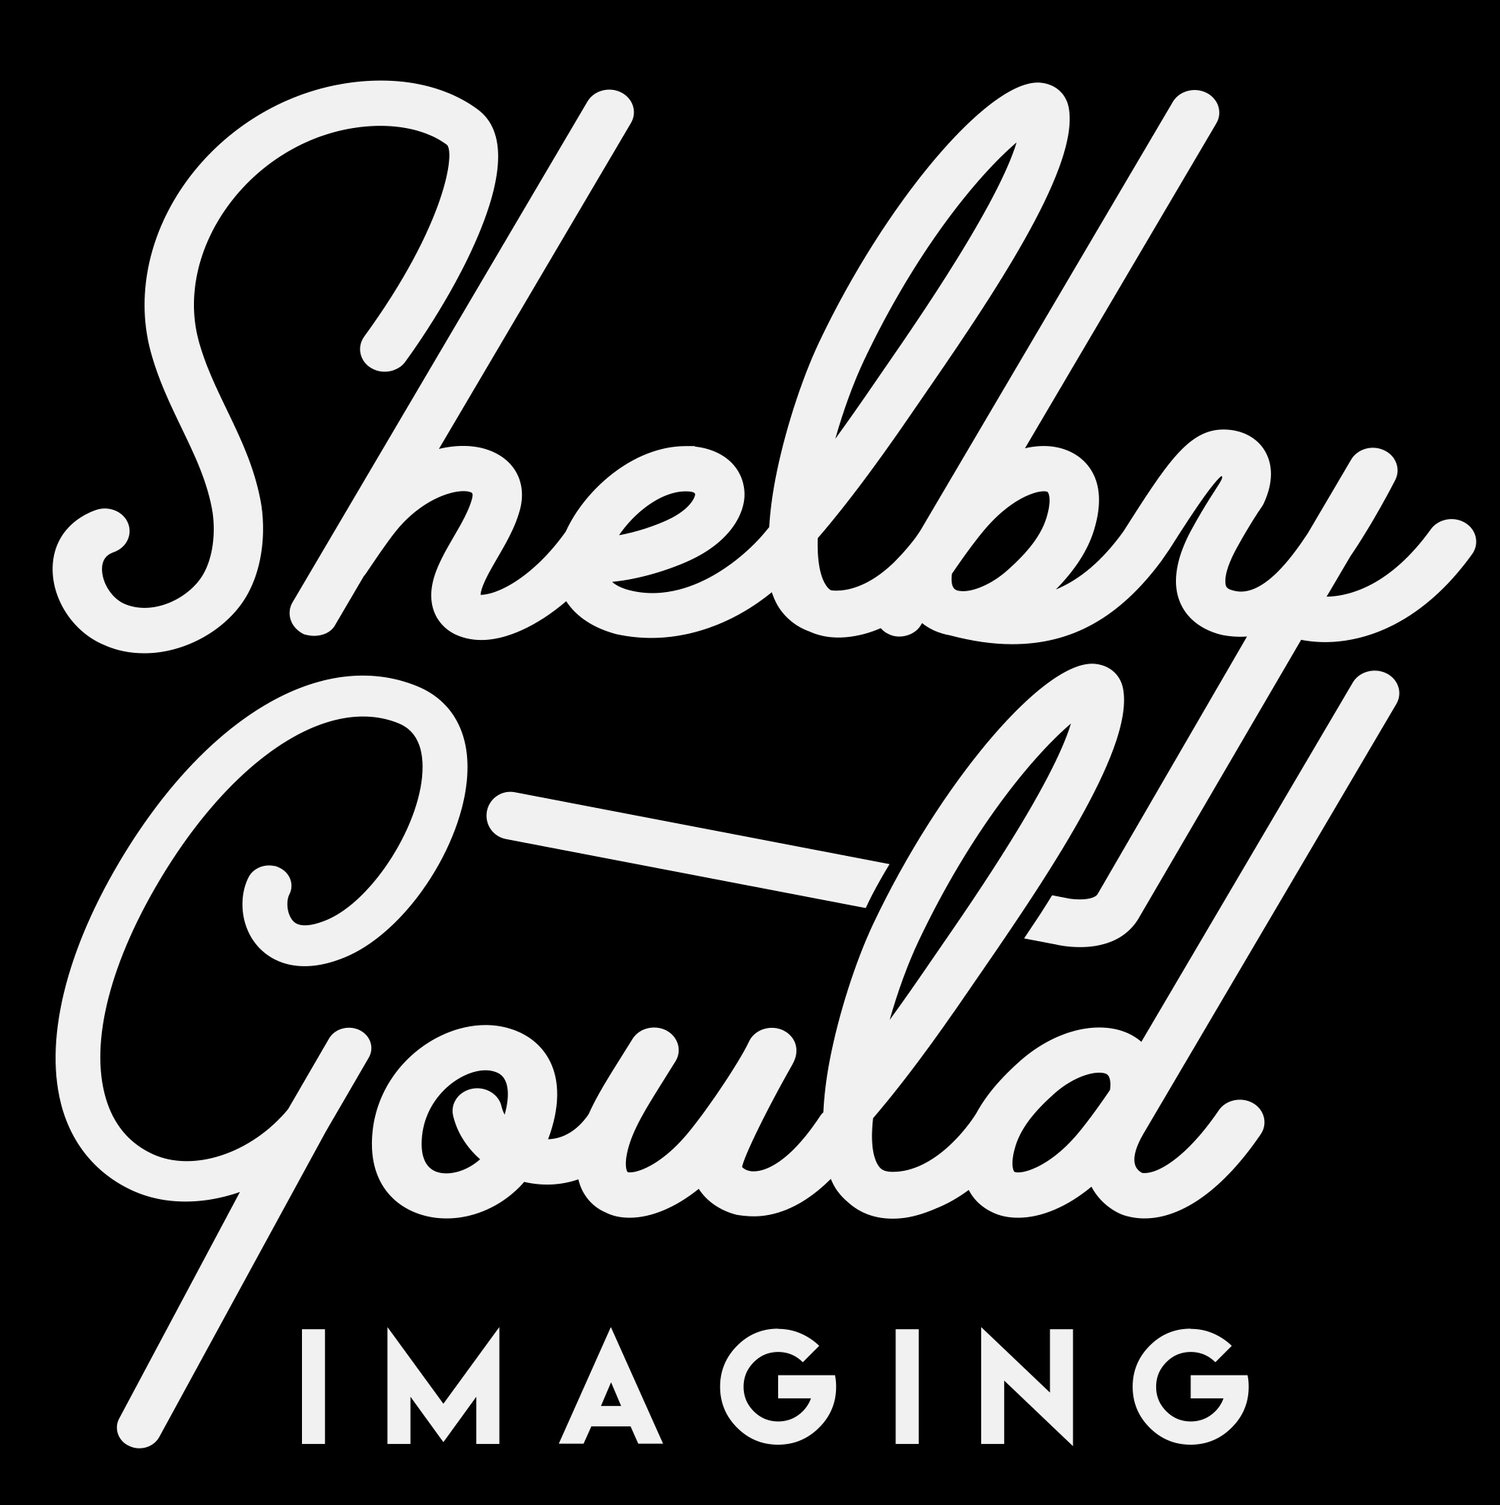 SHELBY GOULD IMAGING